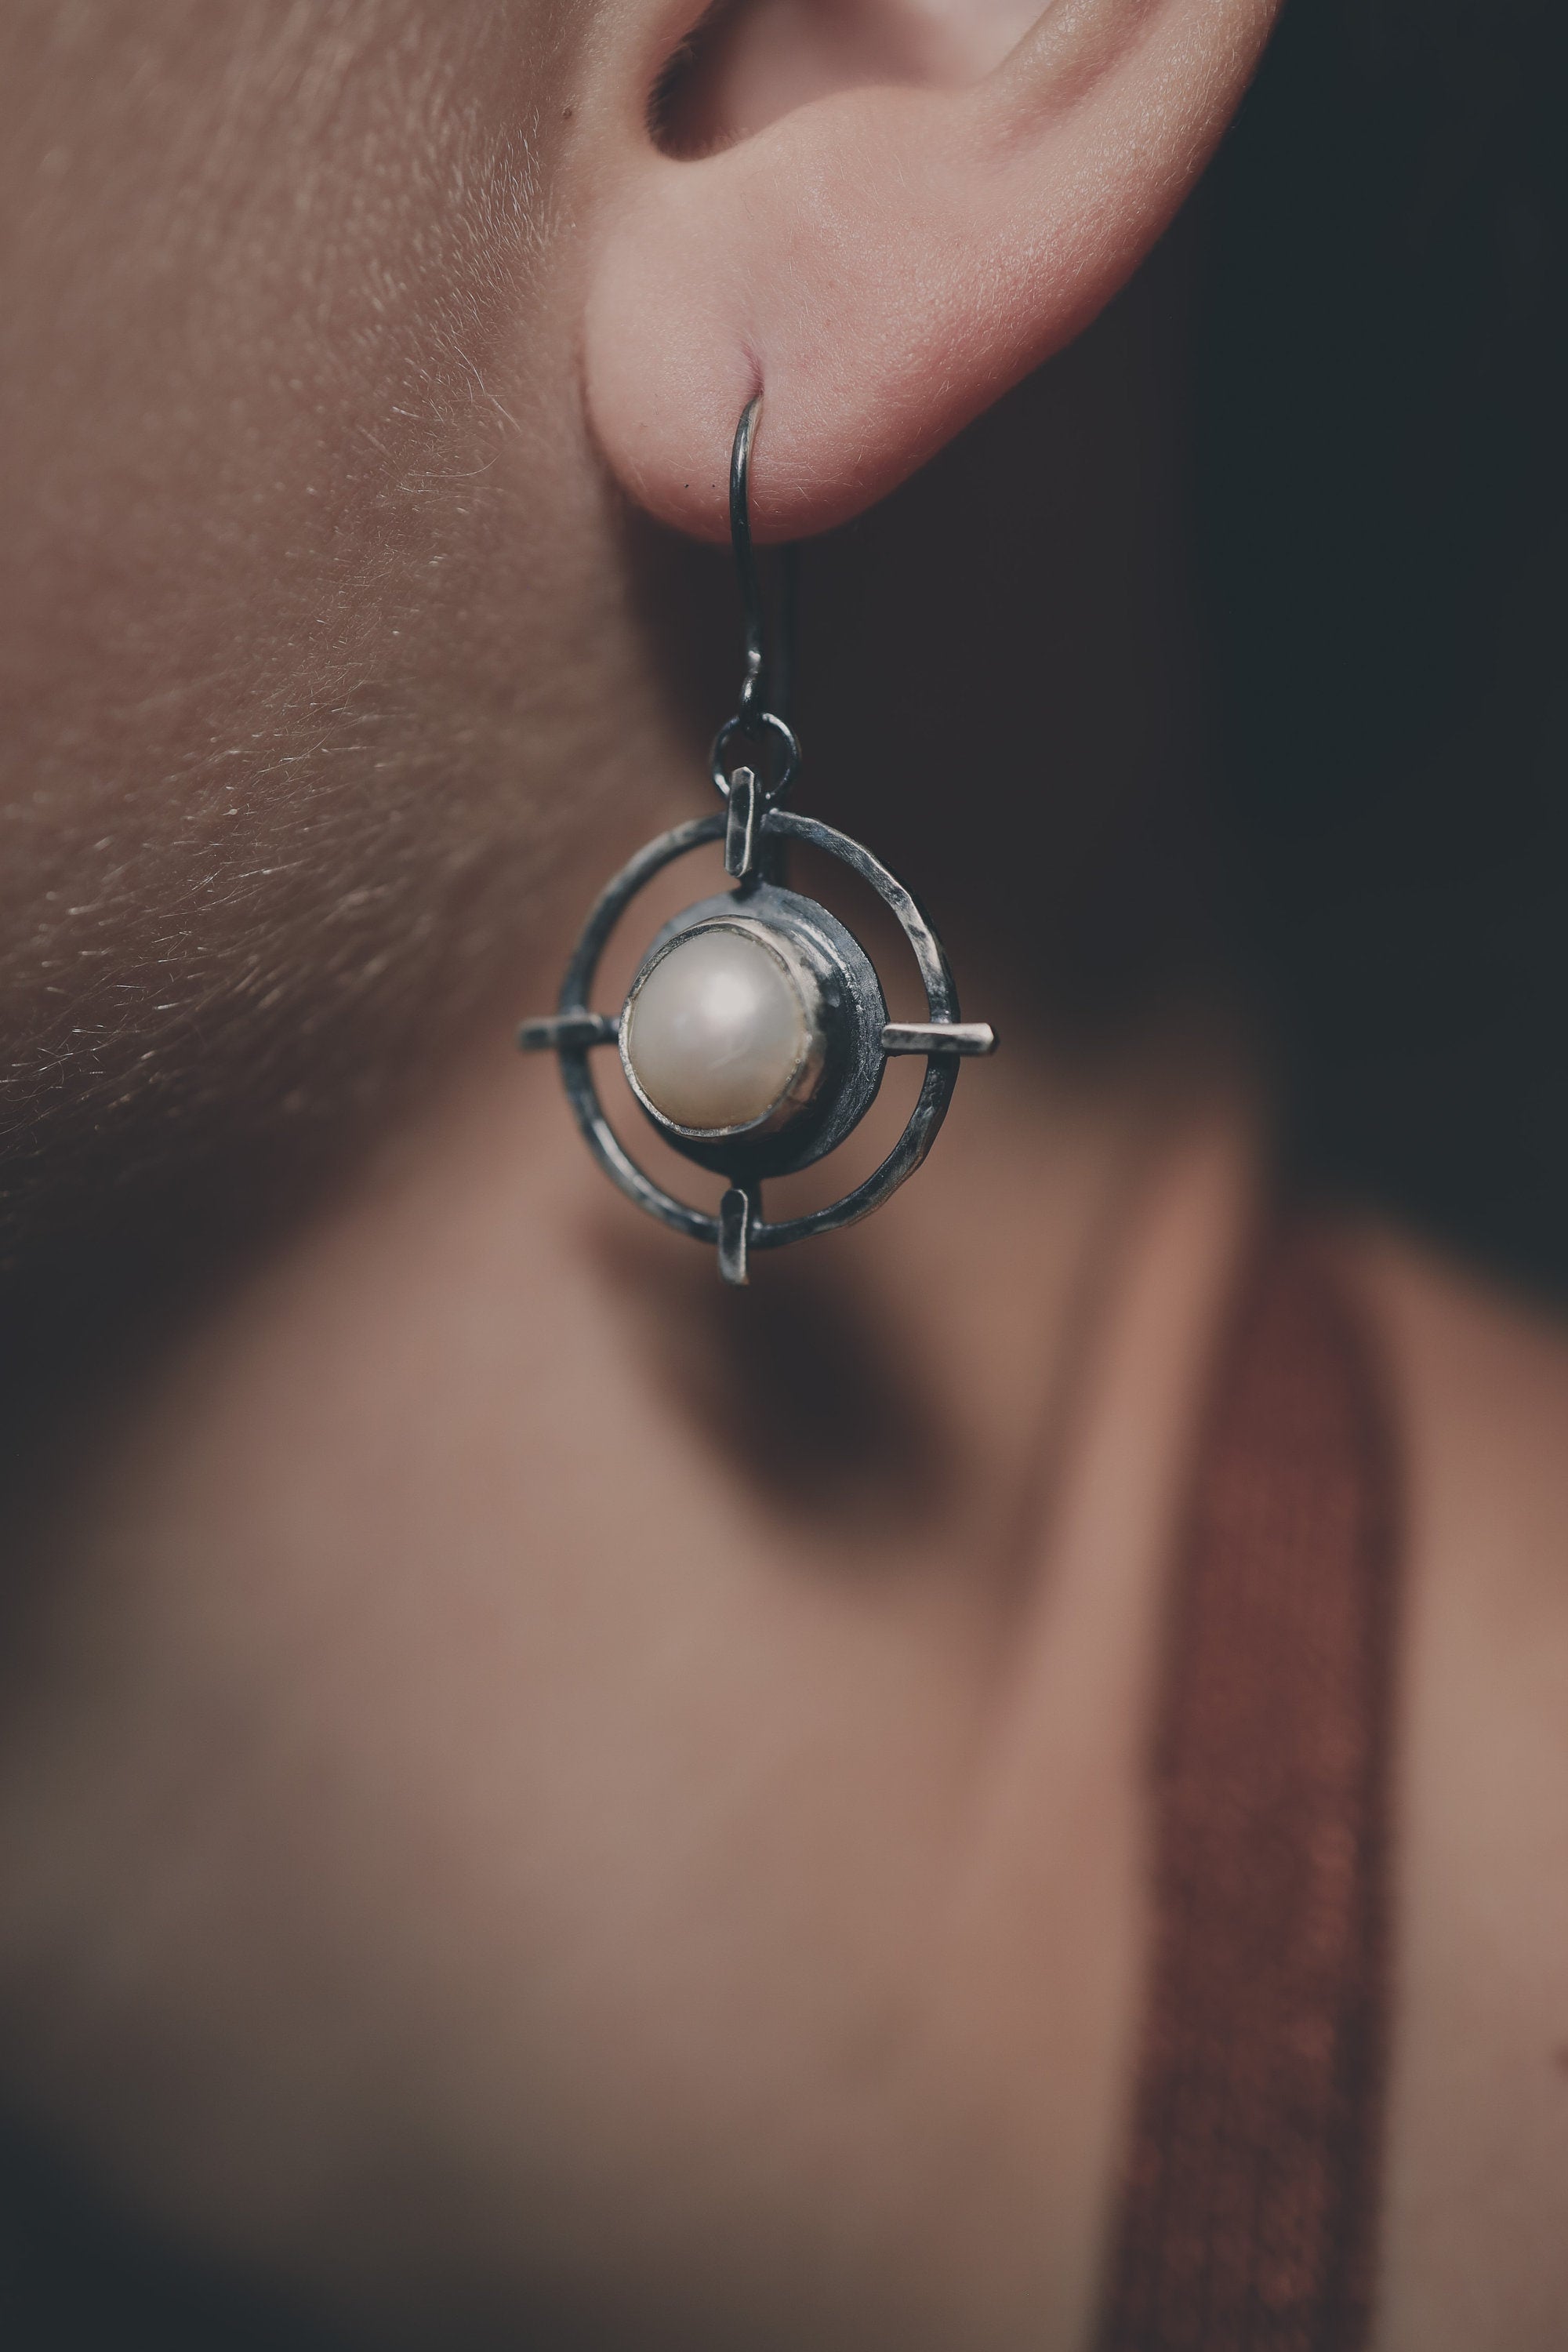 South Sea Pearls - Oxidised Rustick Boho Vibe - 925 Sterling Silver - Intricately Layered & Textured Old World Vibe Earring